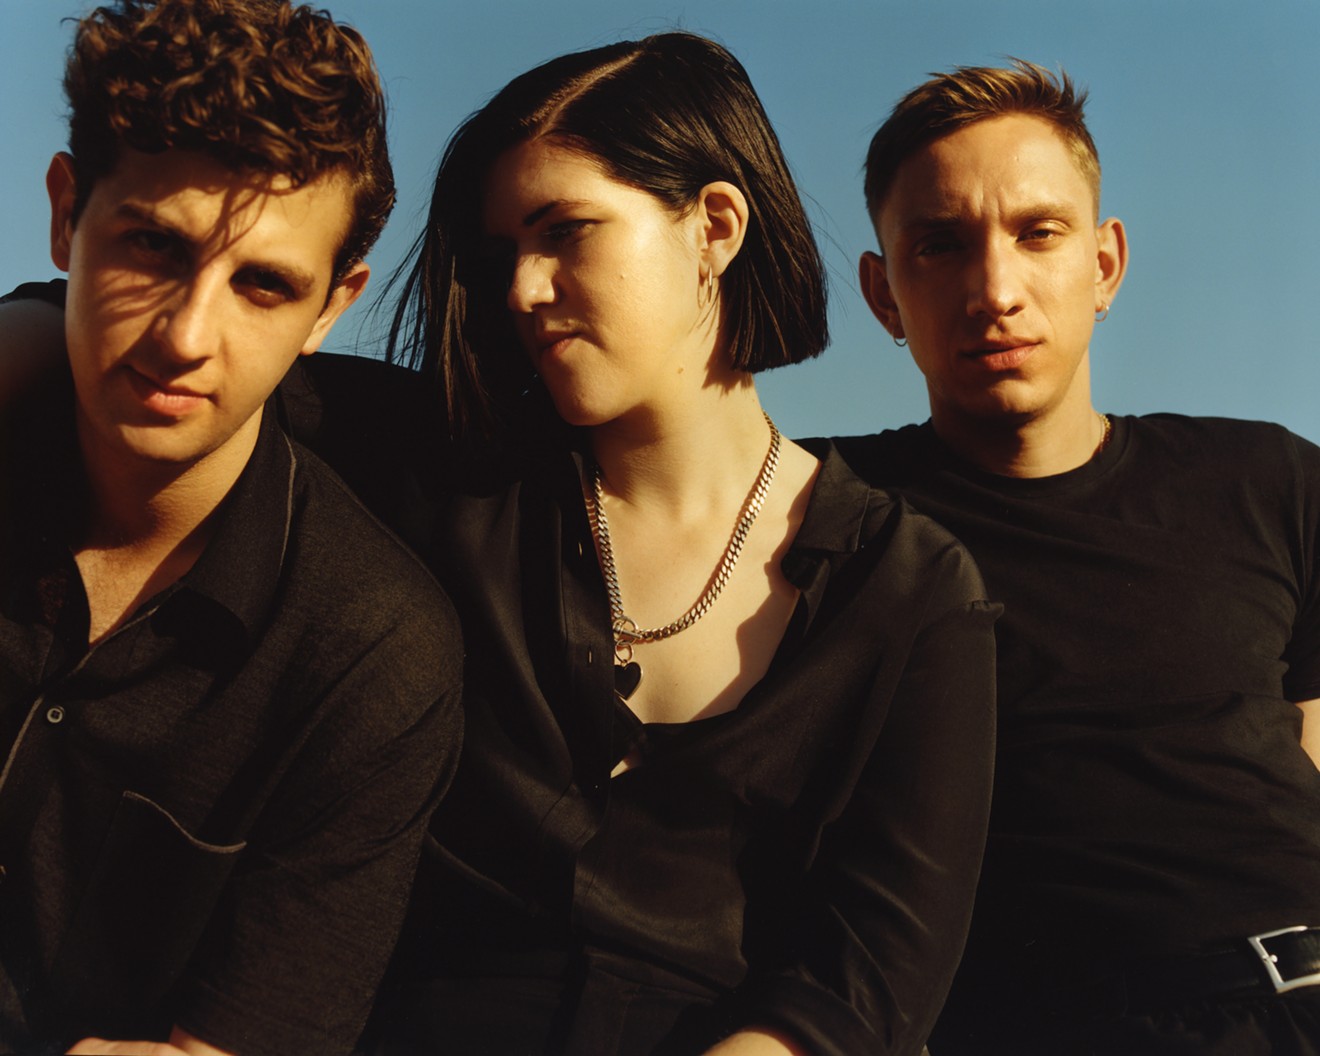 The xx released its third album, I See You, earlier this year.